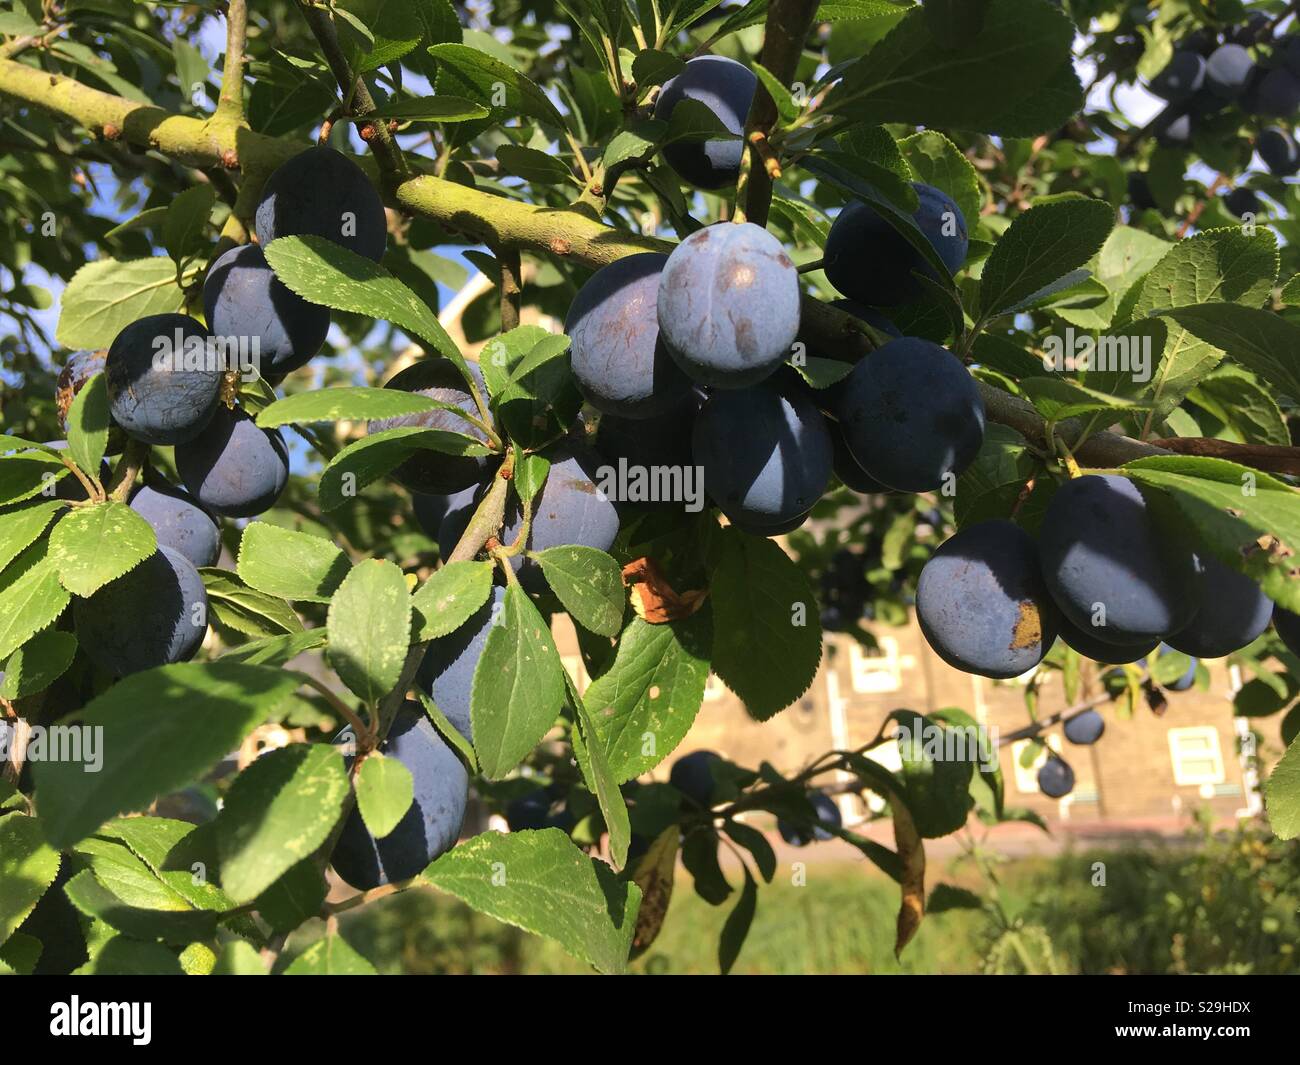 Small Black Bullace, wild plums growing on a tree, a type of Damson that make great jam Stock Photo